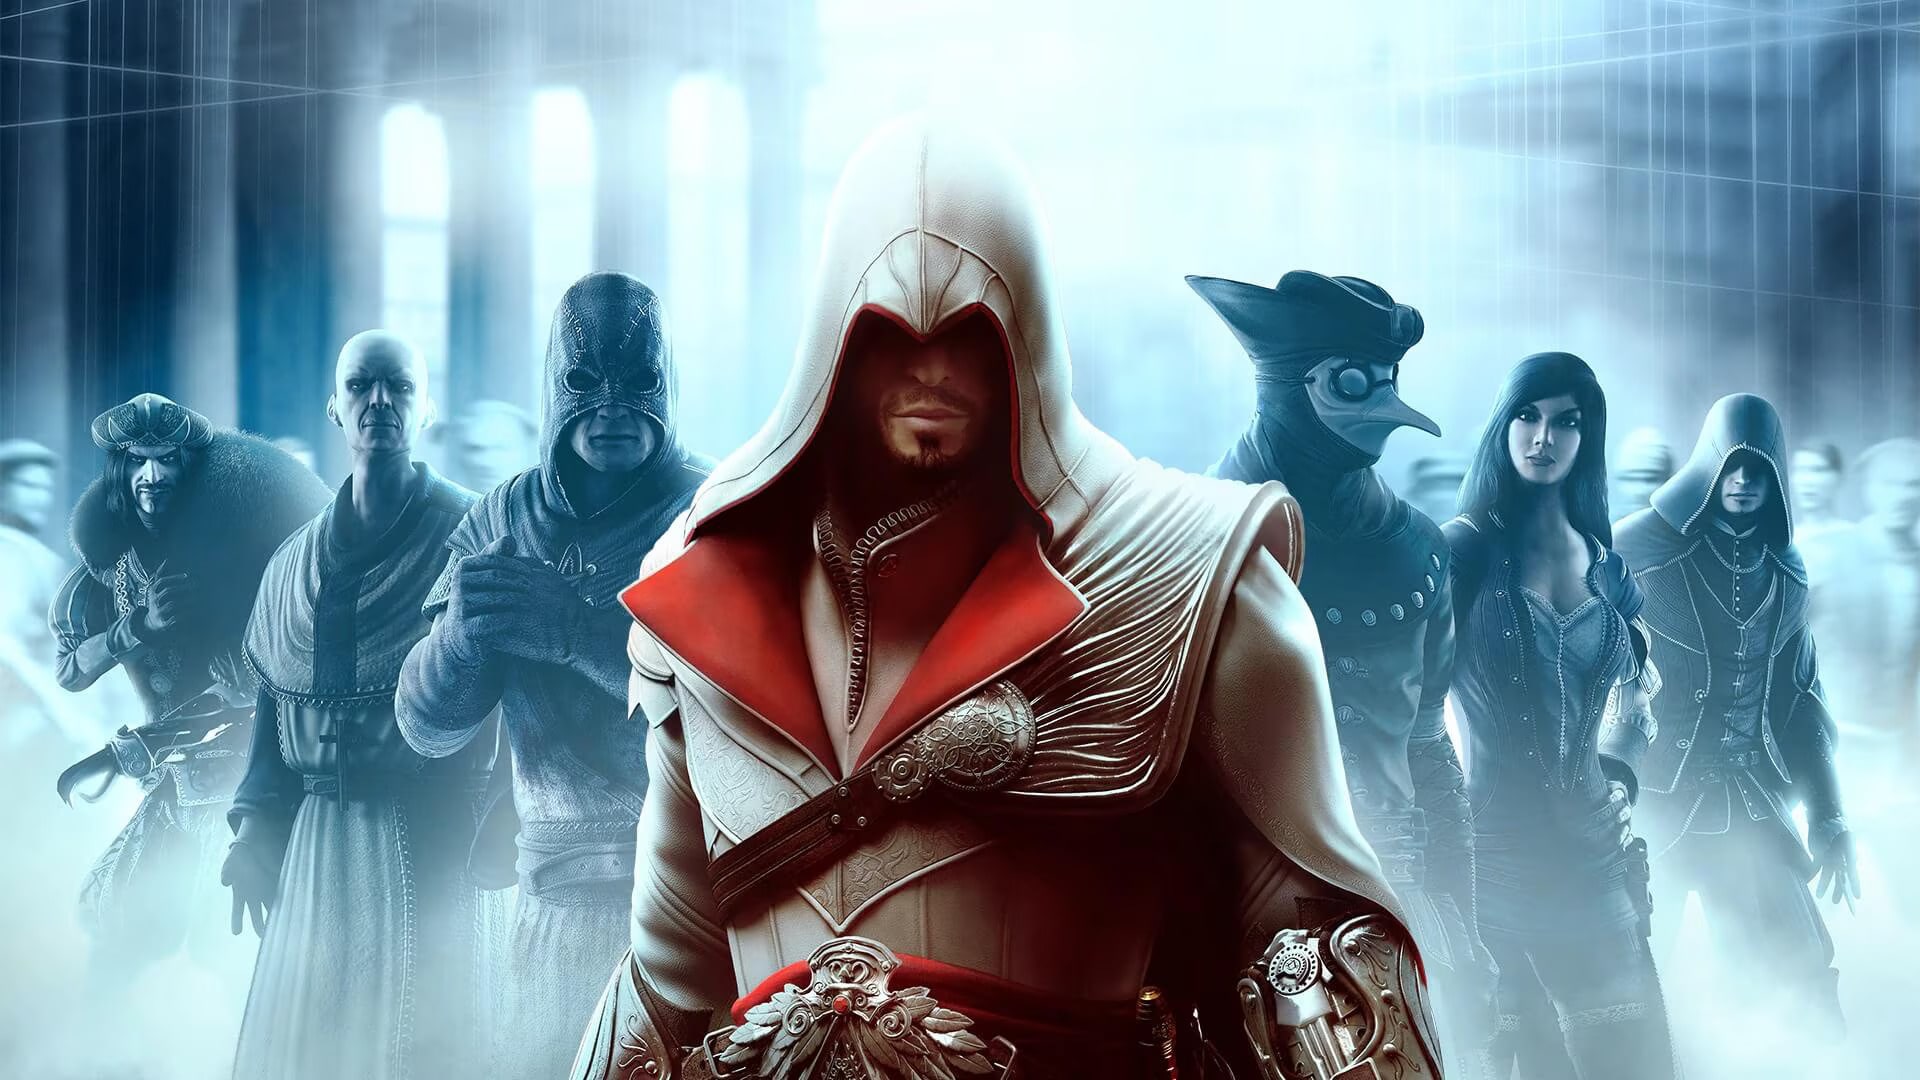 Cover art for Assassin's Creed Brotherhood showing Ezio Auditore in his iconic outfit